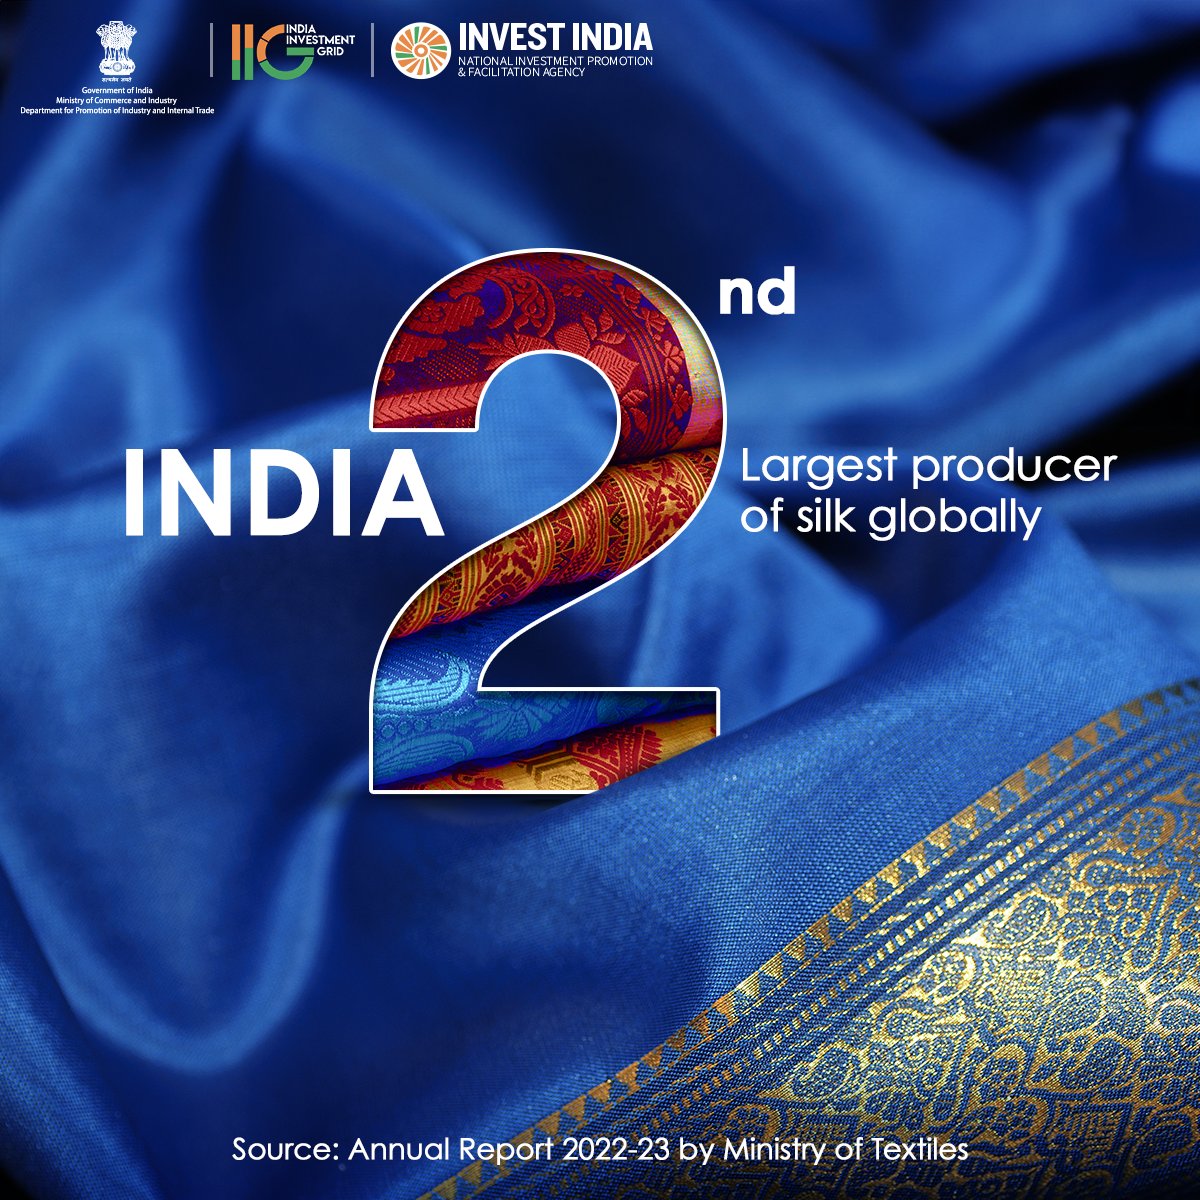 #GrowWithIndia
#India is the only nation to produce all 4 #silk varieties—Mulberry, Tropical & Oak Tasar, Muga, and Eri, showcasing a rich spectrum of #sericulture

#InvestInIndia #Textiles #MakeInIndia 
@cbdhage @TheBengalIndex @KolkataInfra @IndexBihar @lucknow_updates @BHiren